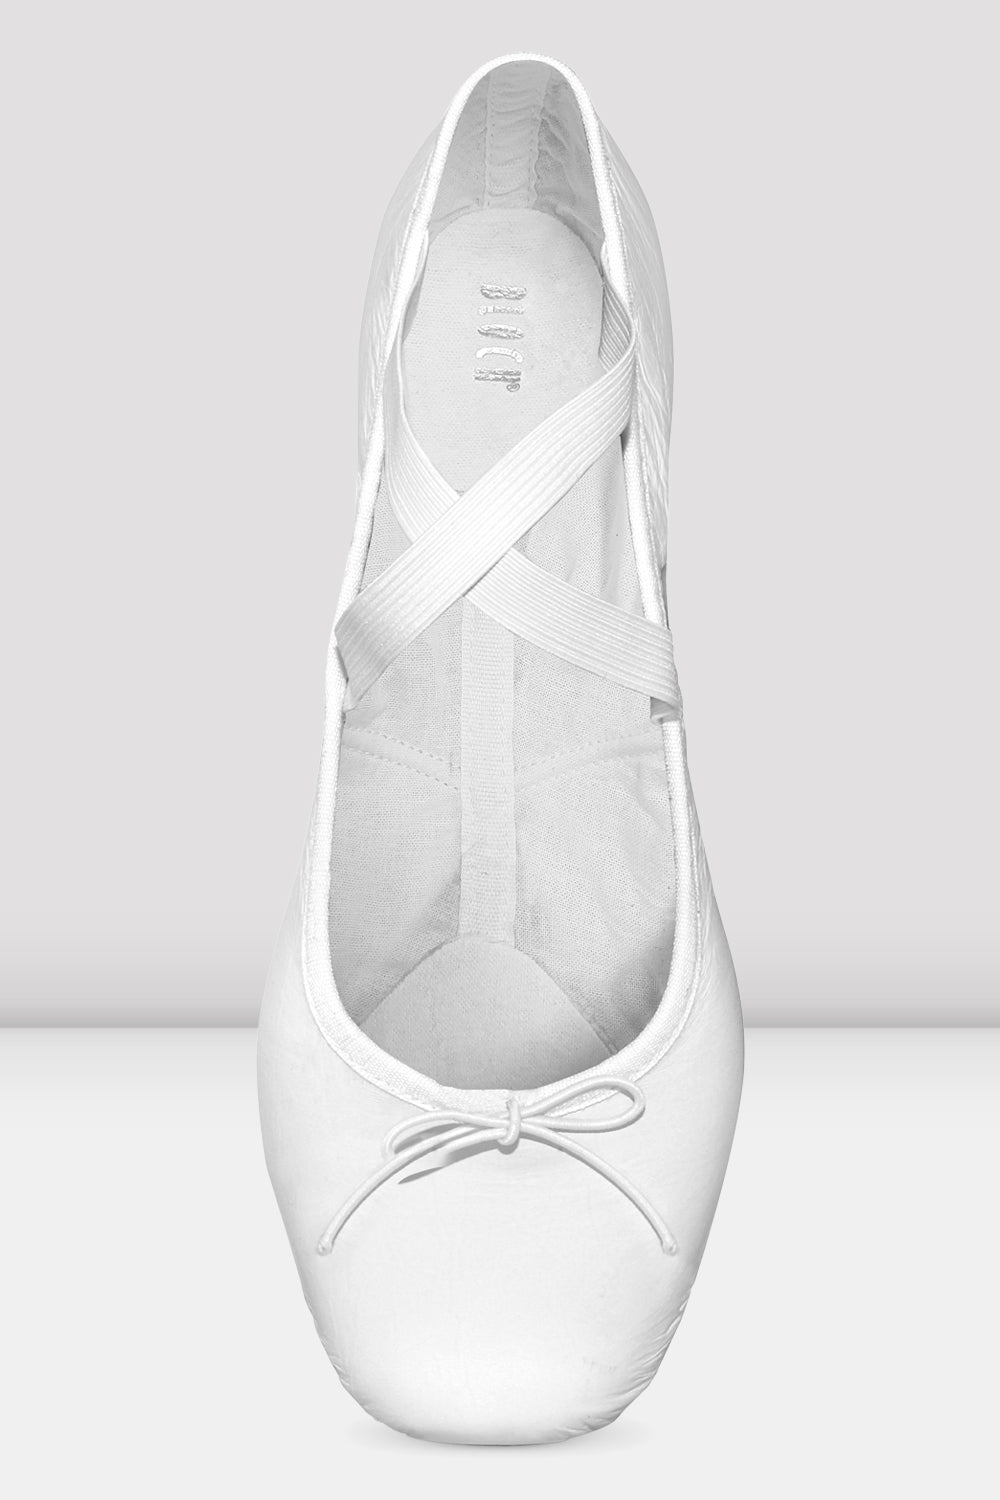 BLOCH Mens Precision Leather Ballet Shoes, White Leather